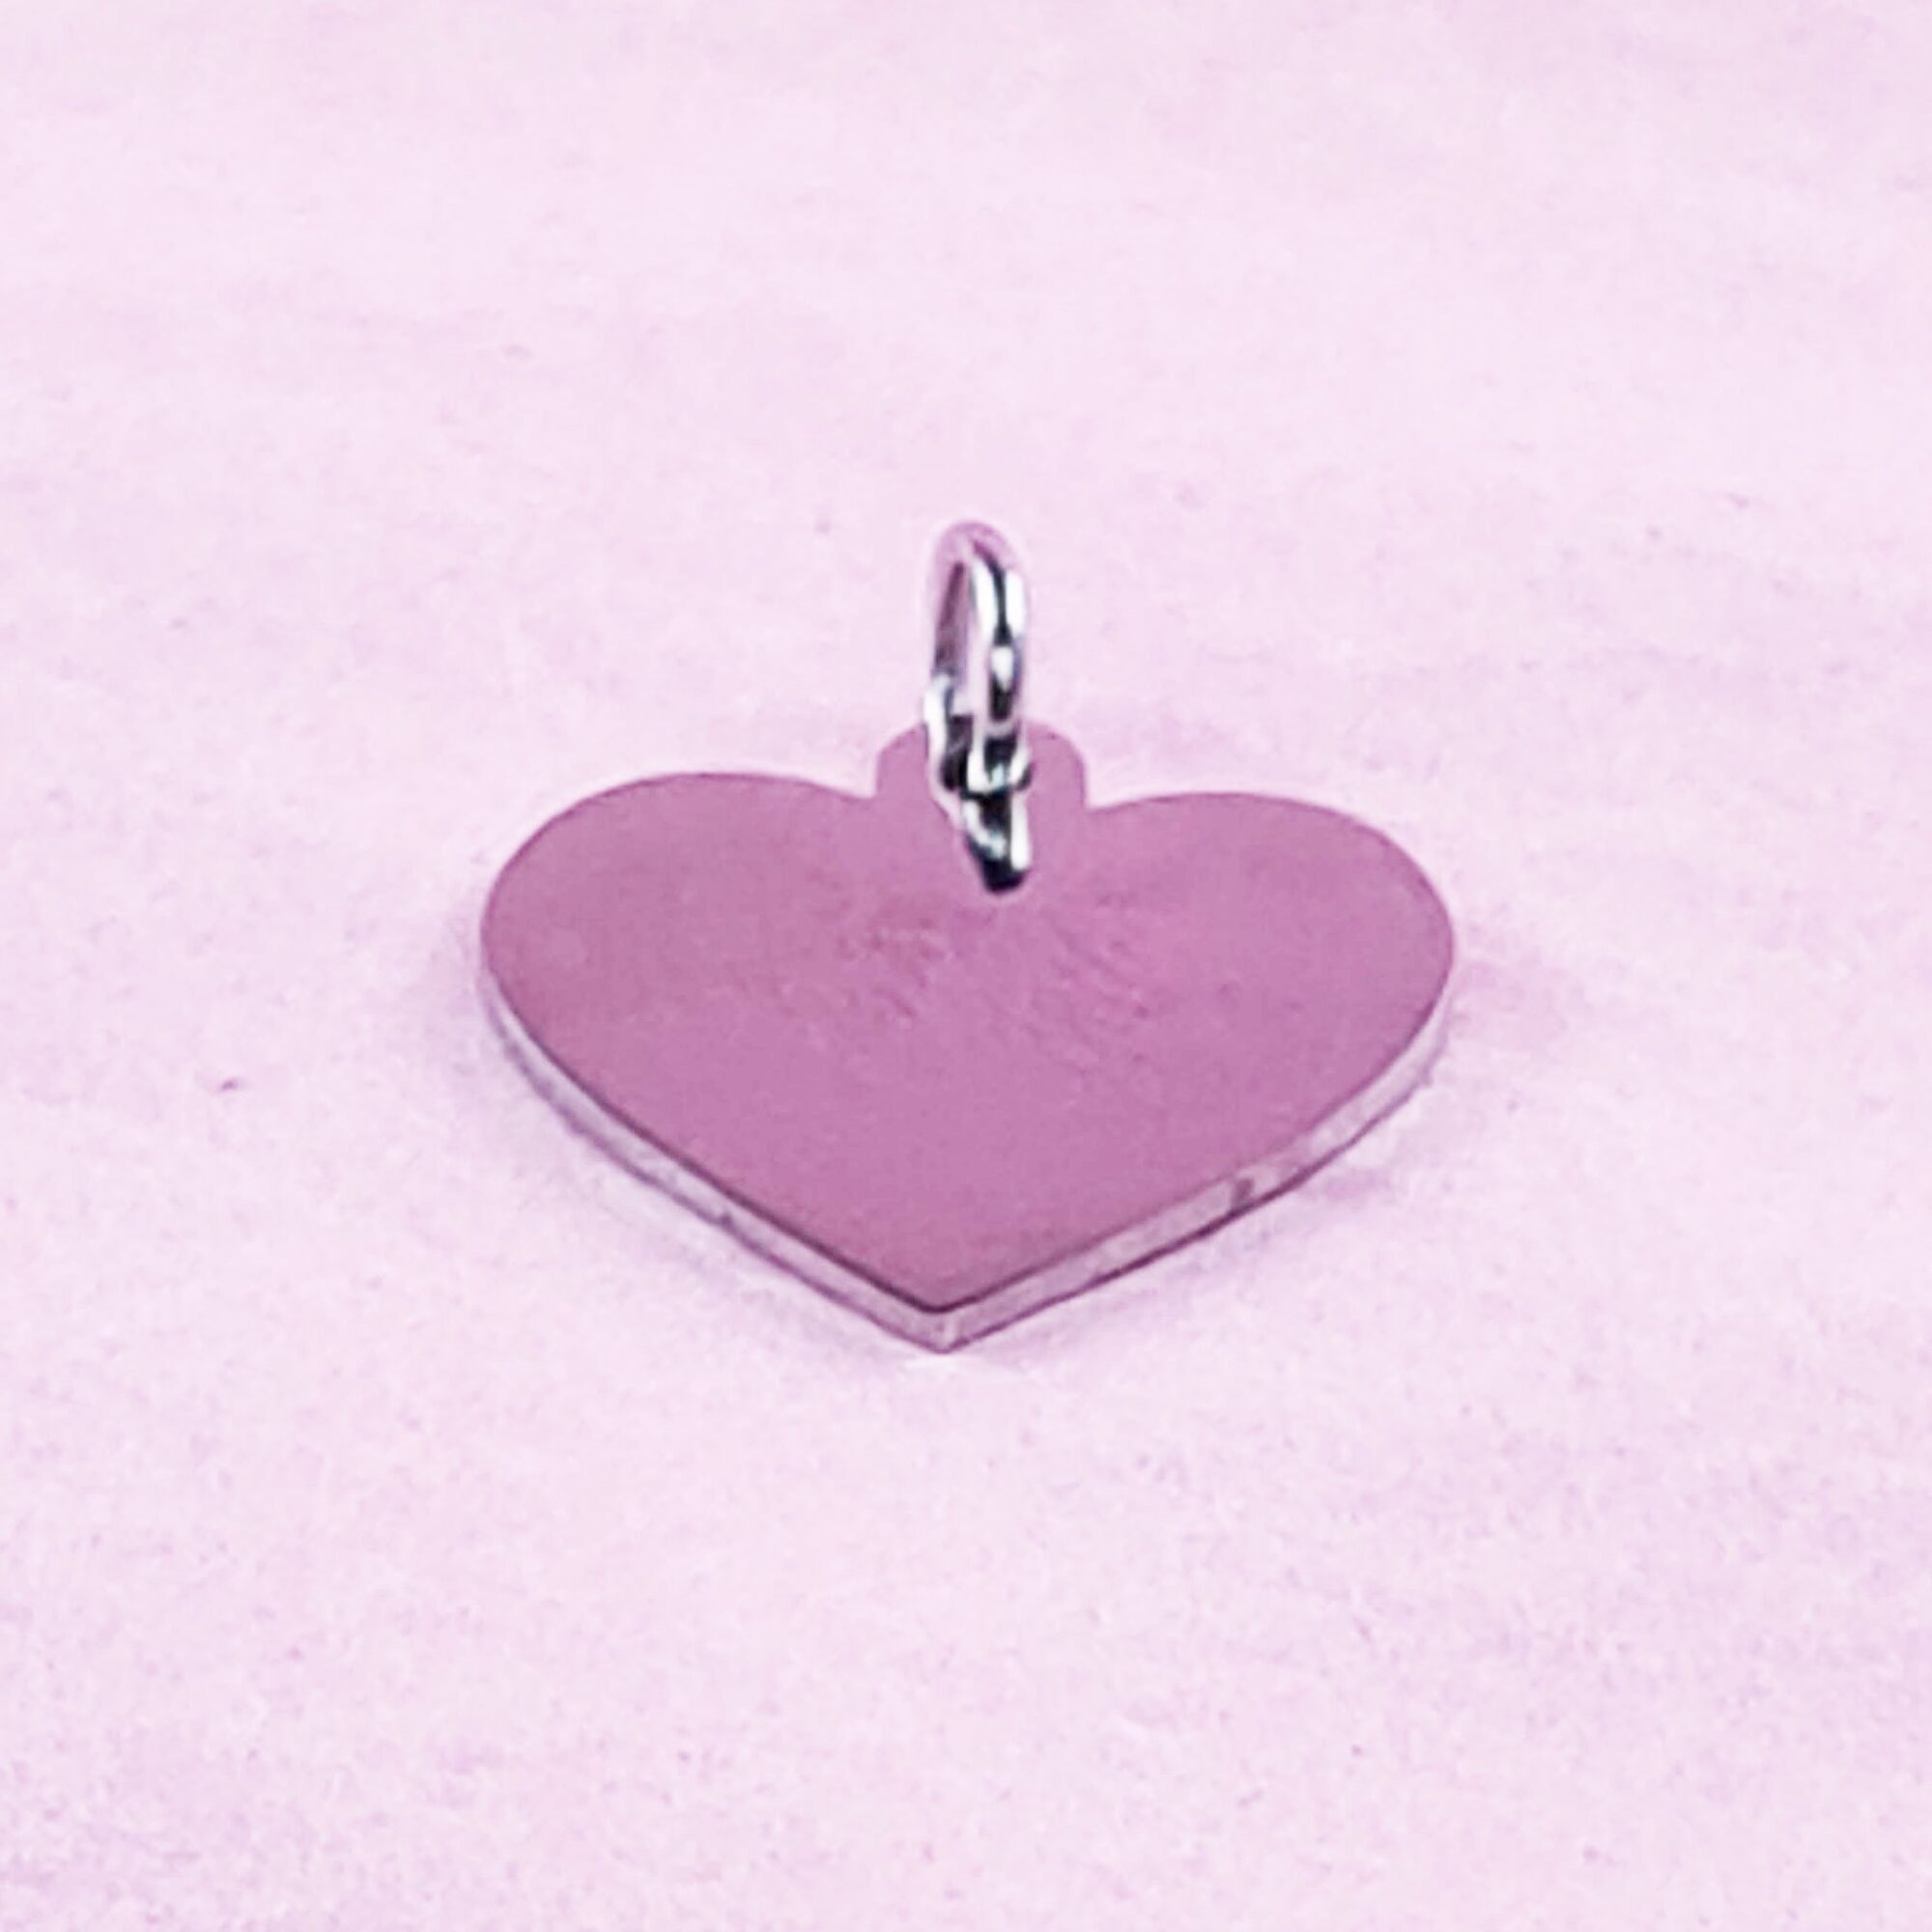 Heart Necklace Charm